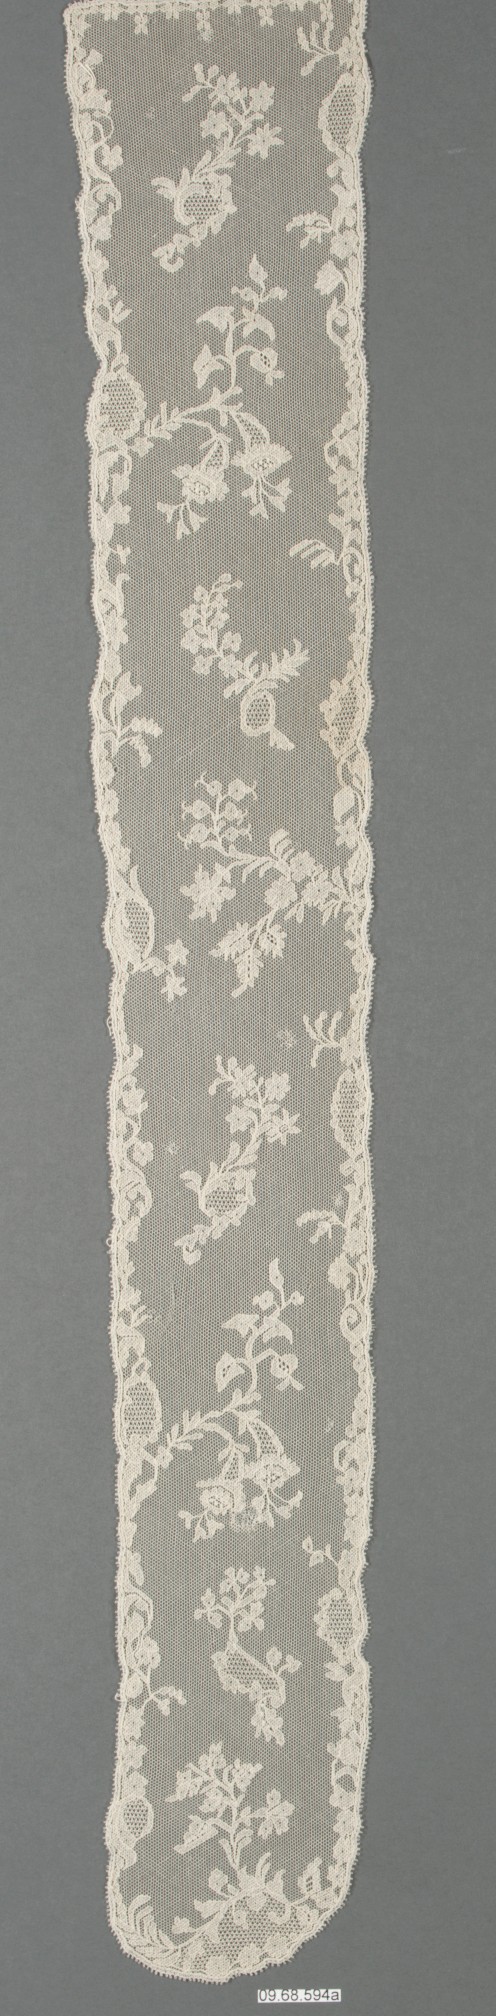 Lappet (one of a pair) | French or Flemish | The Metropolitan Museum of Art